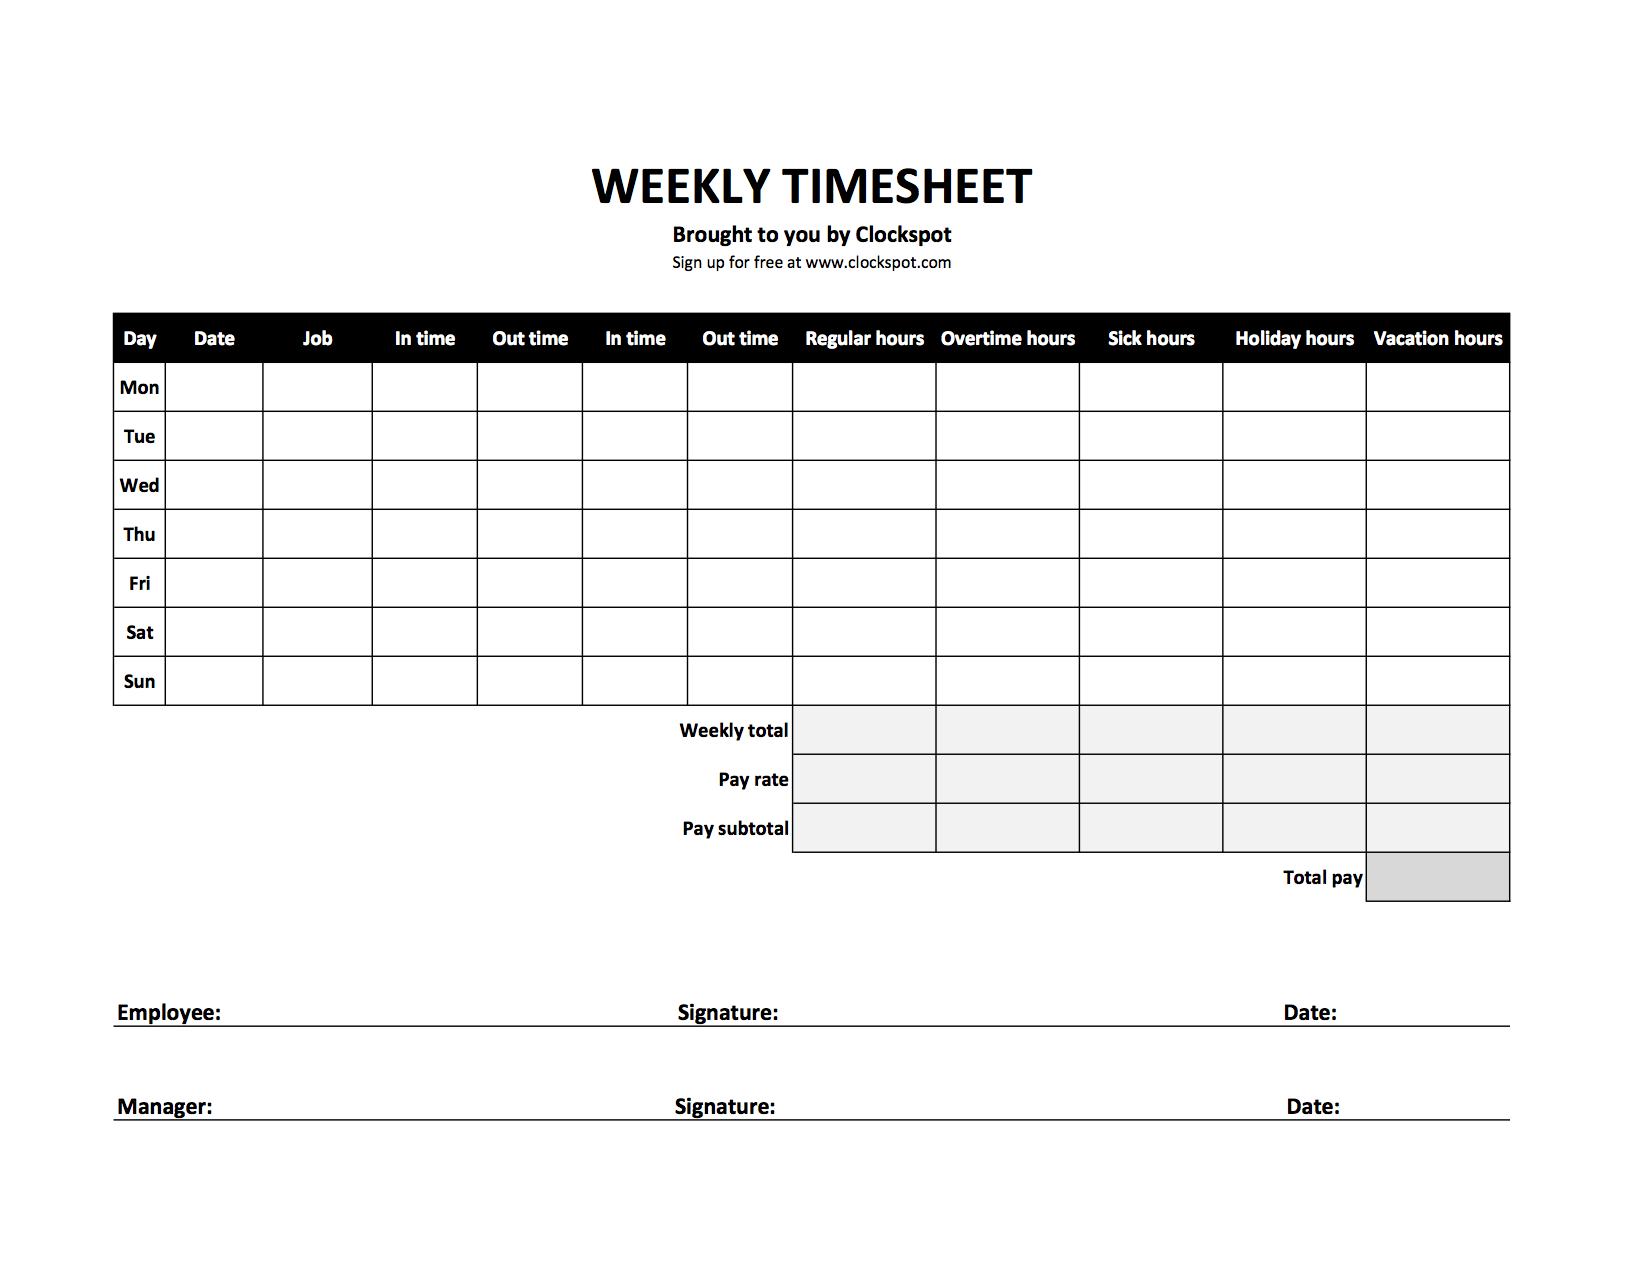 Excel Spreadsheet Timesheet In Free Time Tracking Spreadsheets  Excel Timesheet Templates